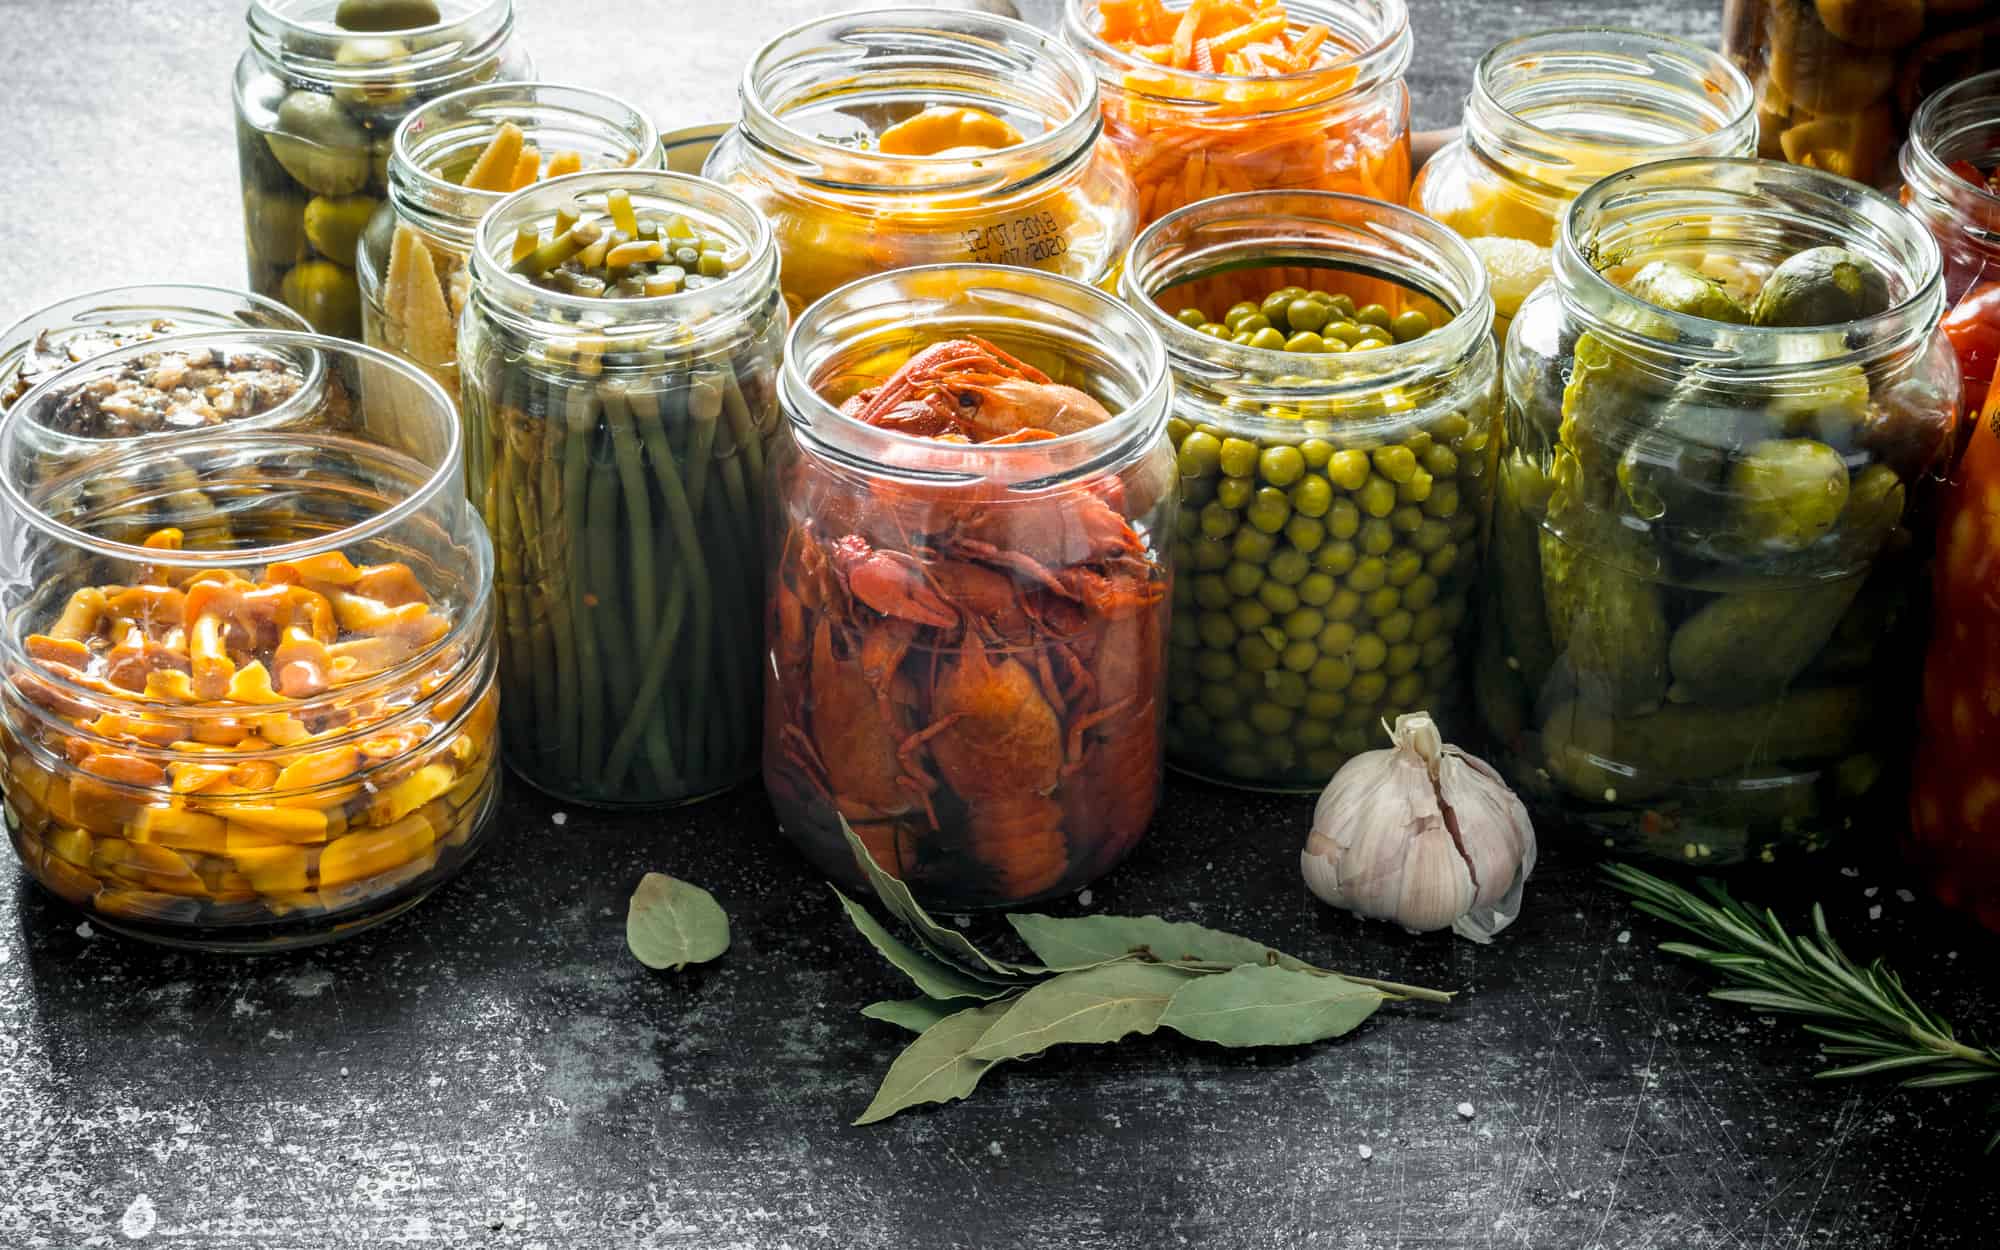 Composition with jars of pickled food. On dark rustic background